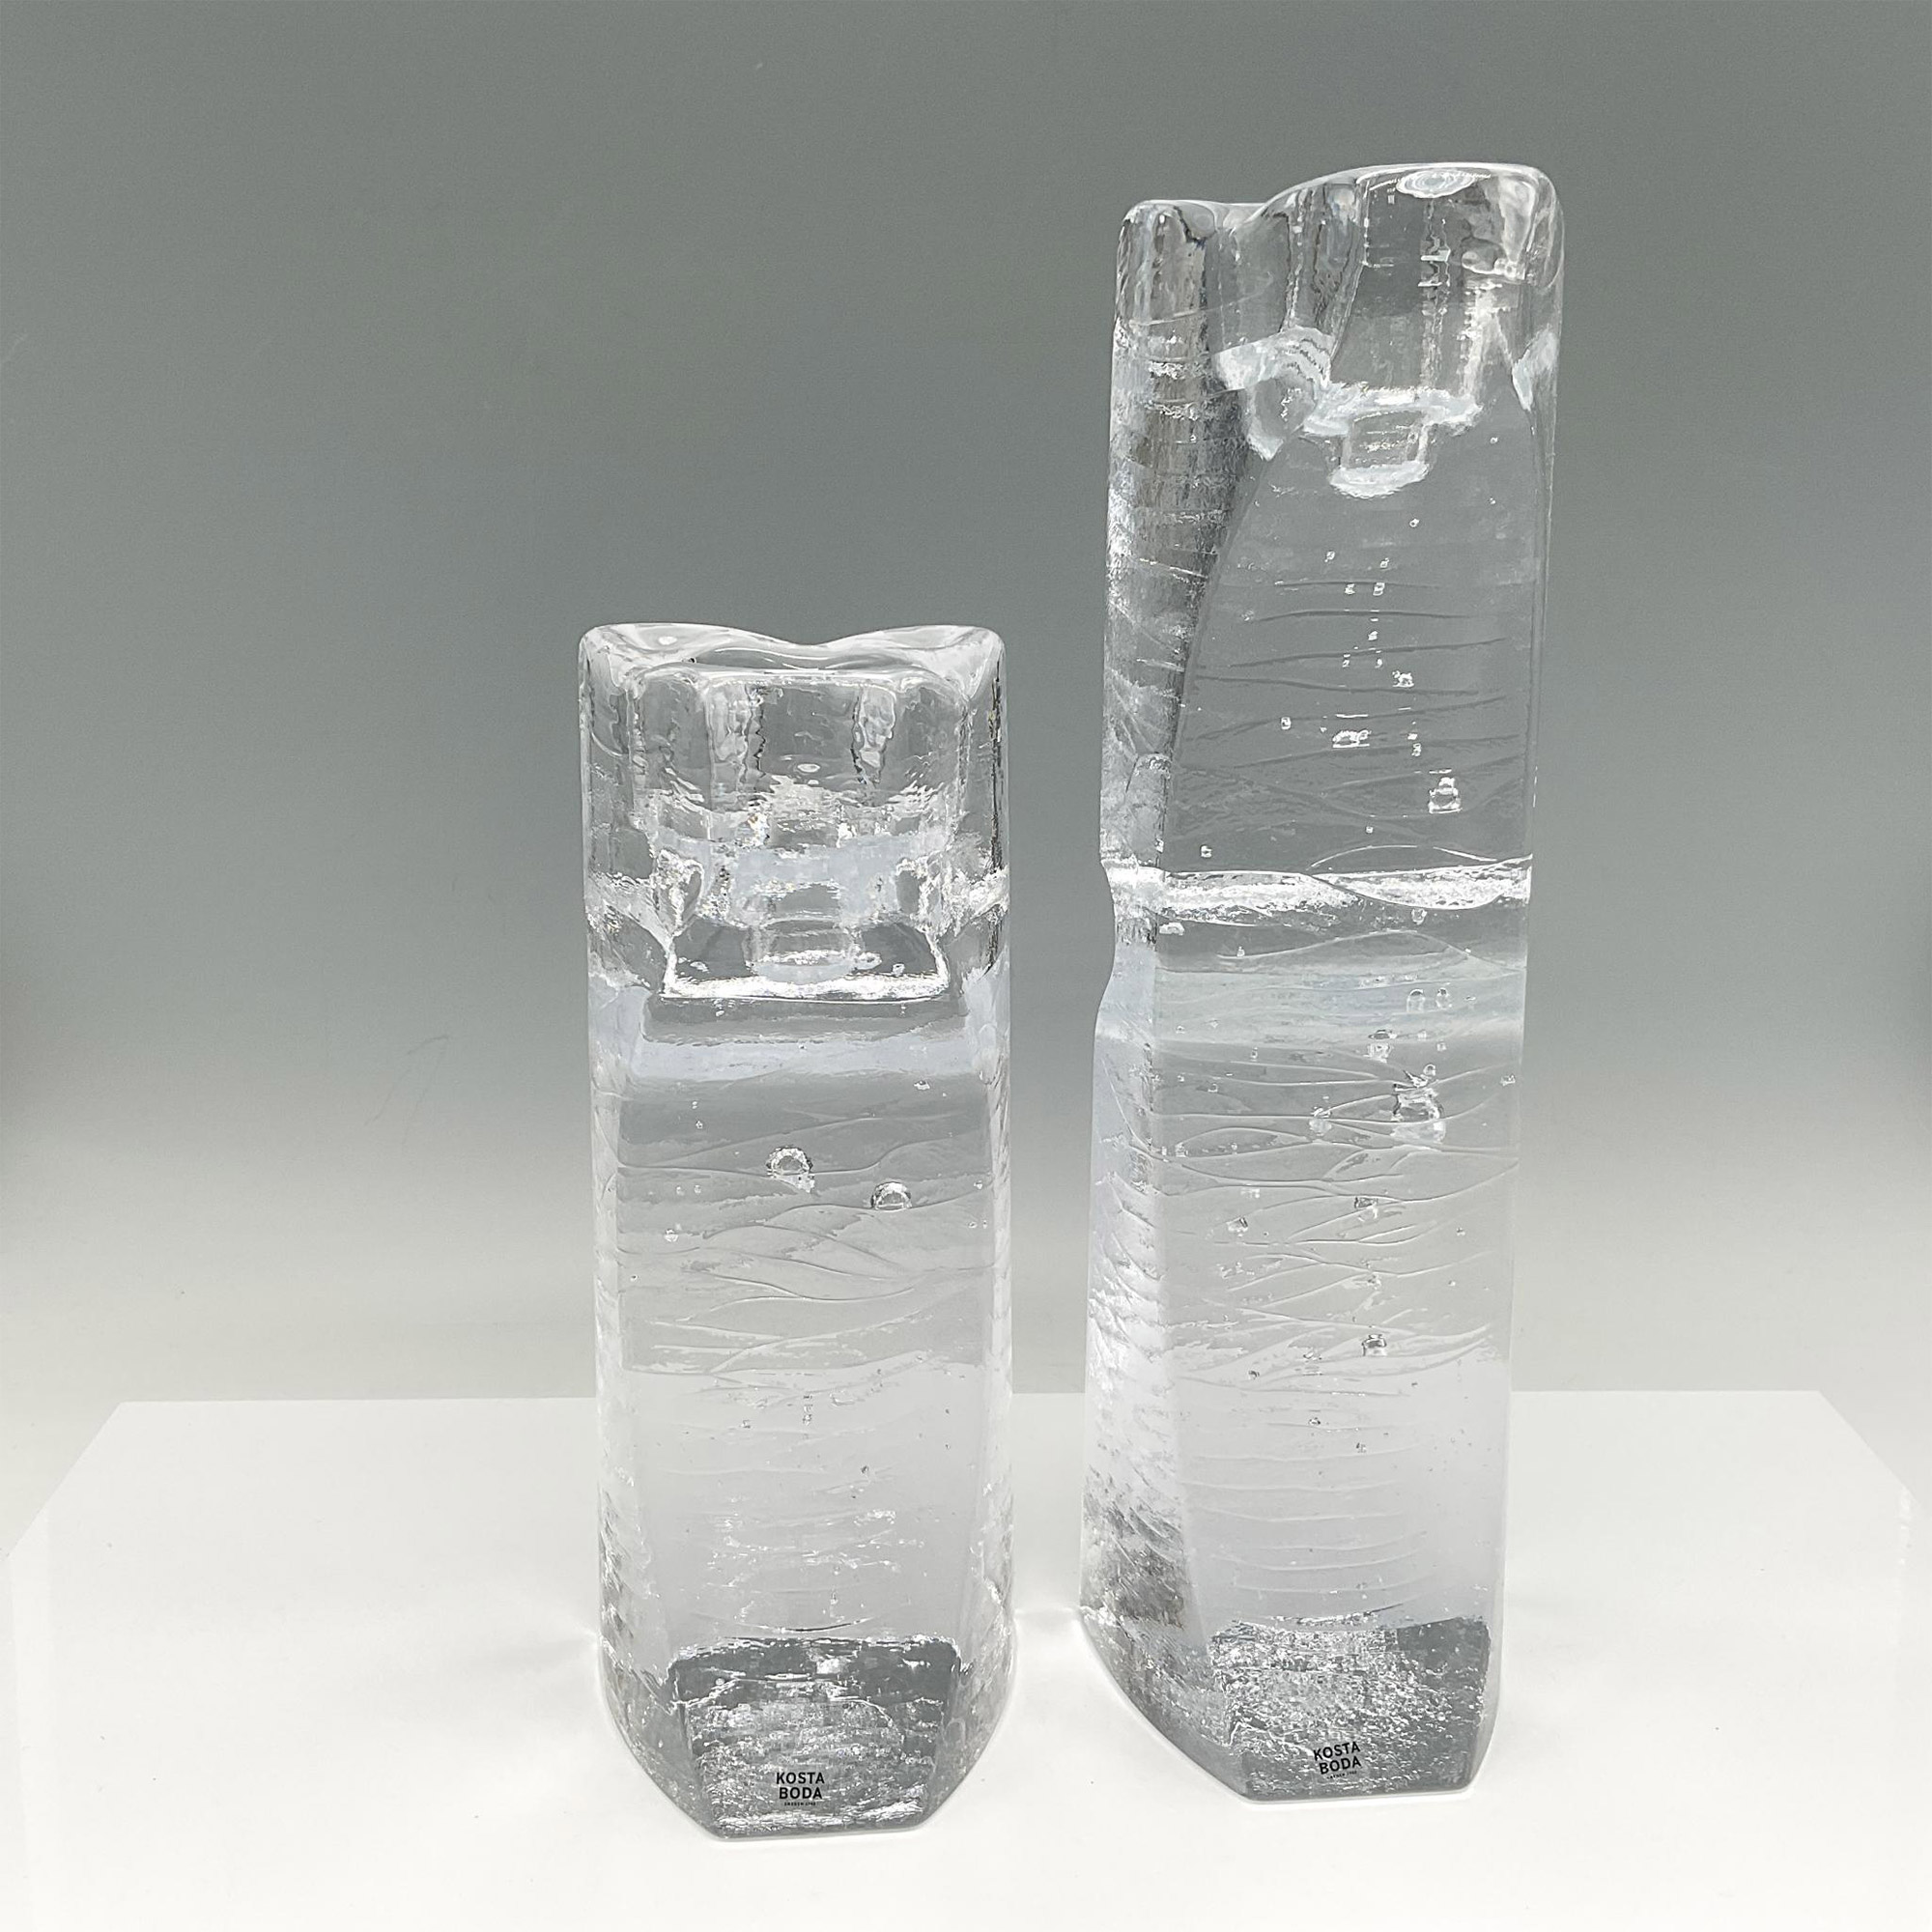 2pc Kosta Boda Crystal Candle Holders, Connect - Image 3 of 5